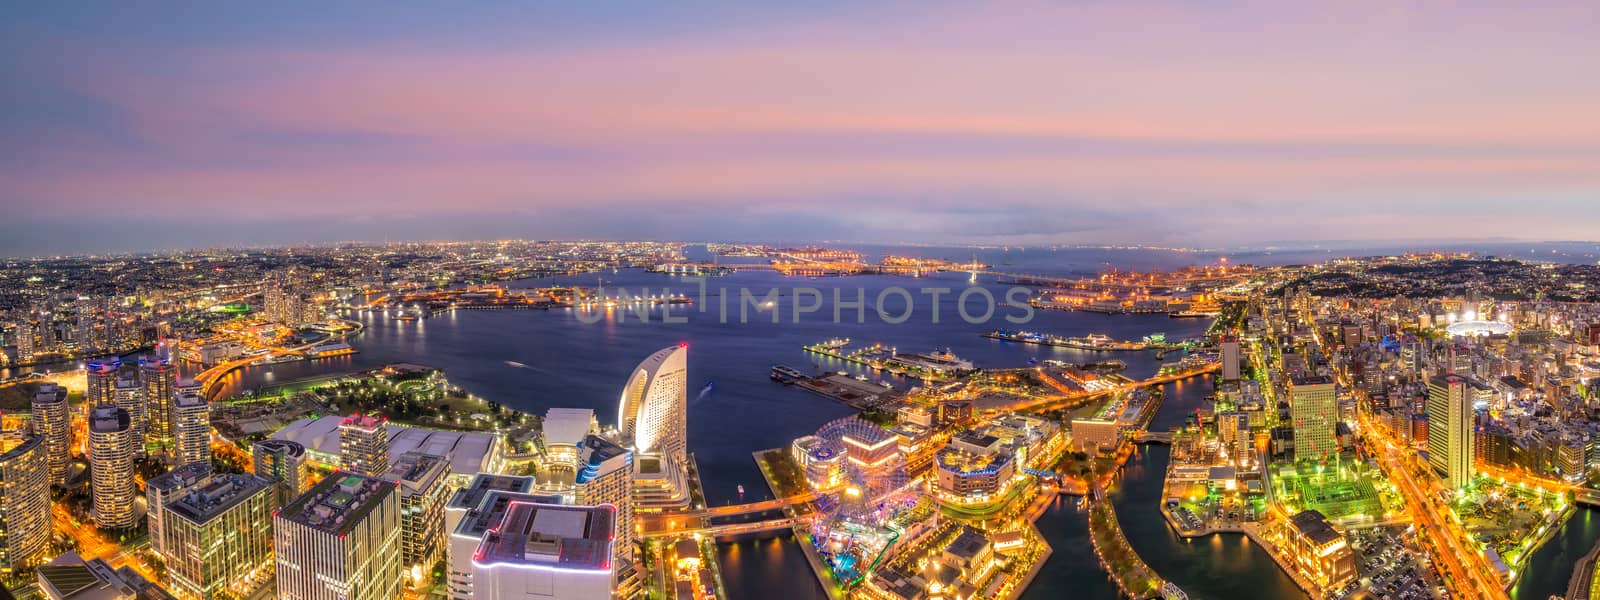 Yokohama city skyline from top view at sunset by f11photo